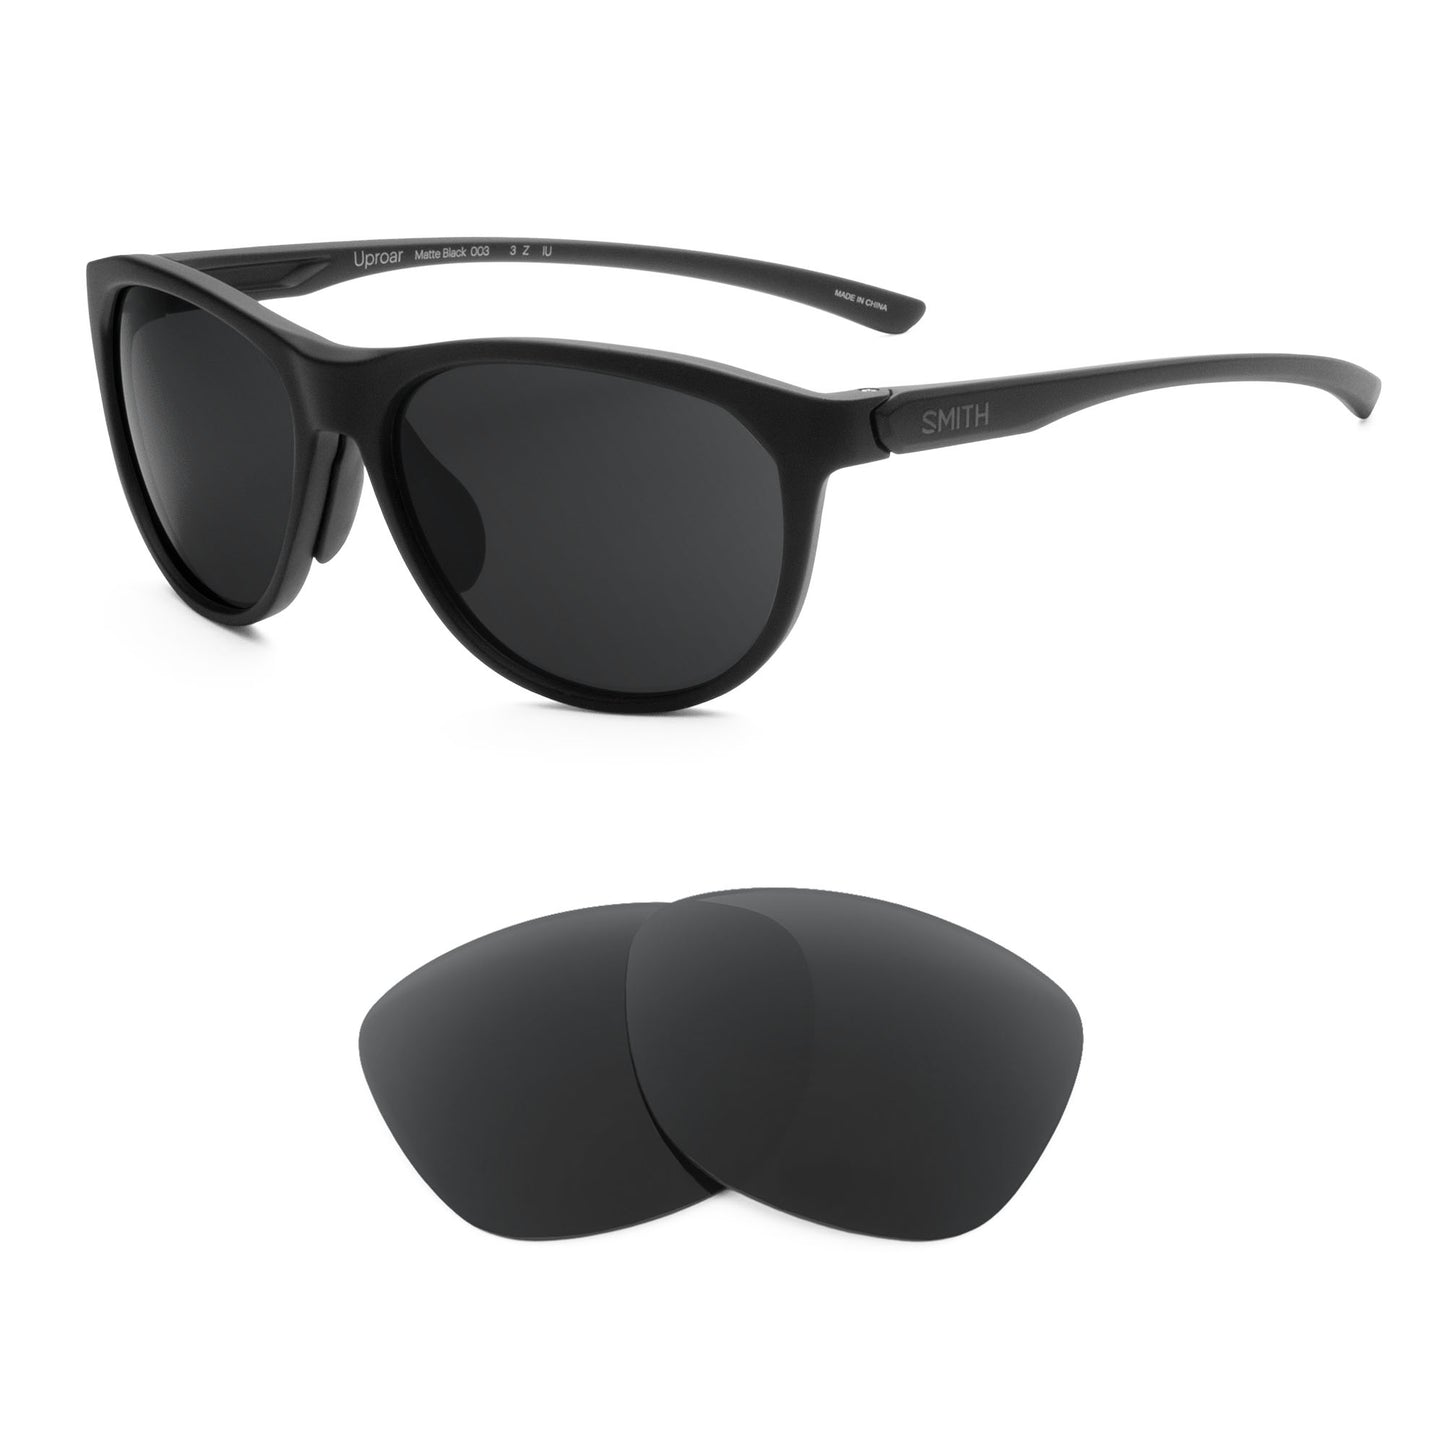 Smith Uproar sunglasses with replacement lenses